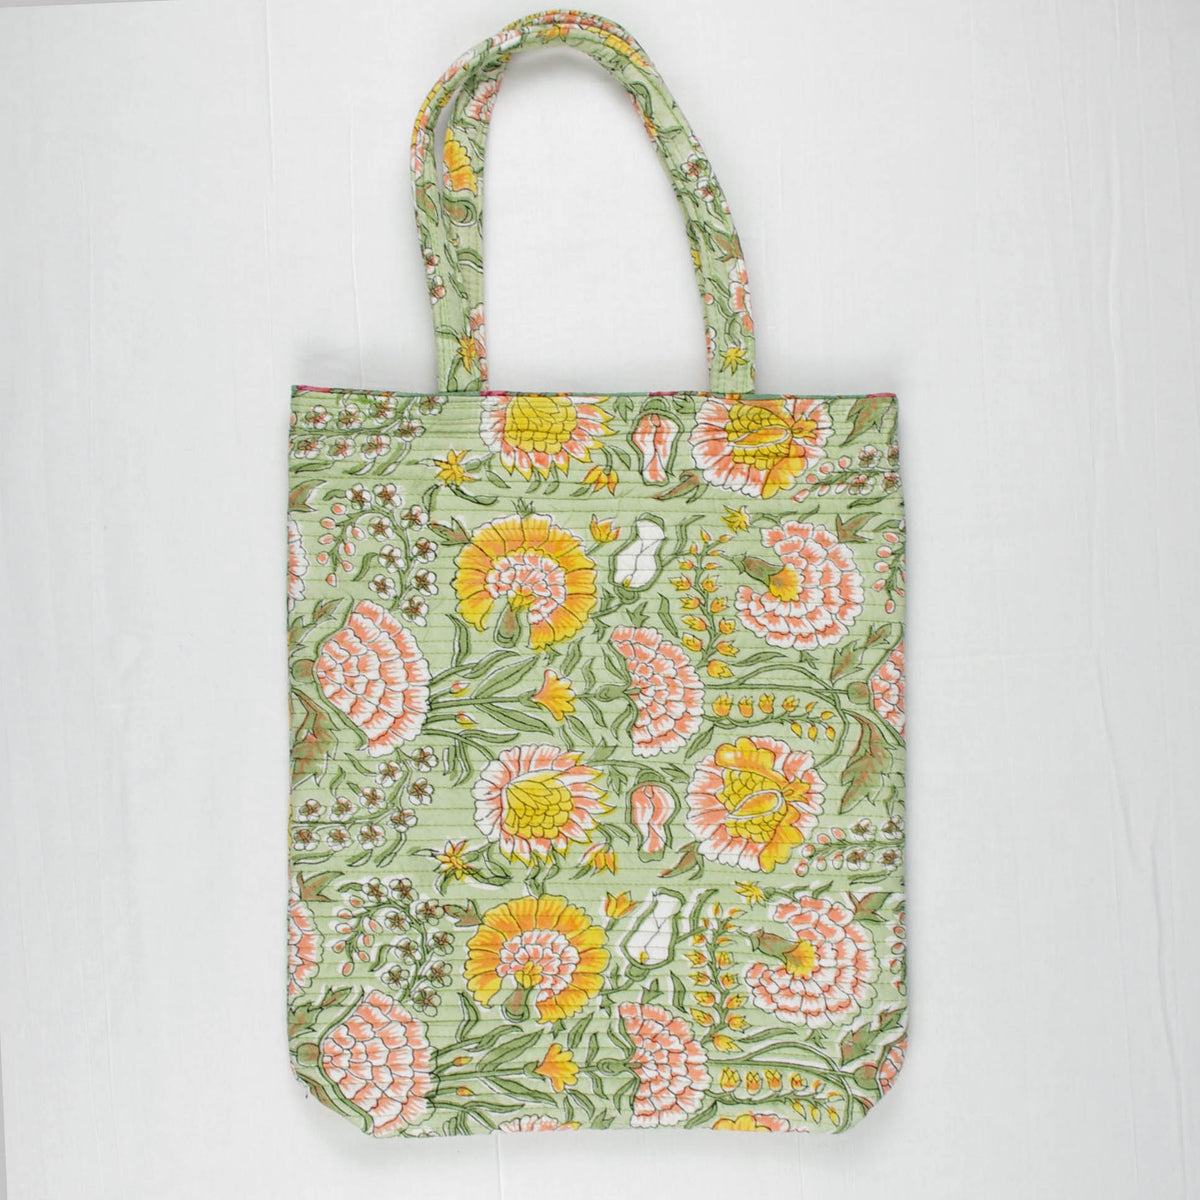 Cotton Quilted Hand Block Print Tote Bag - Marigold Floral On Pista Green